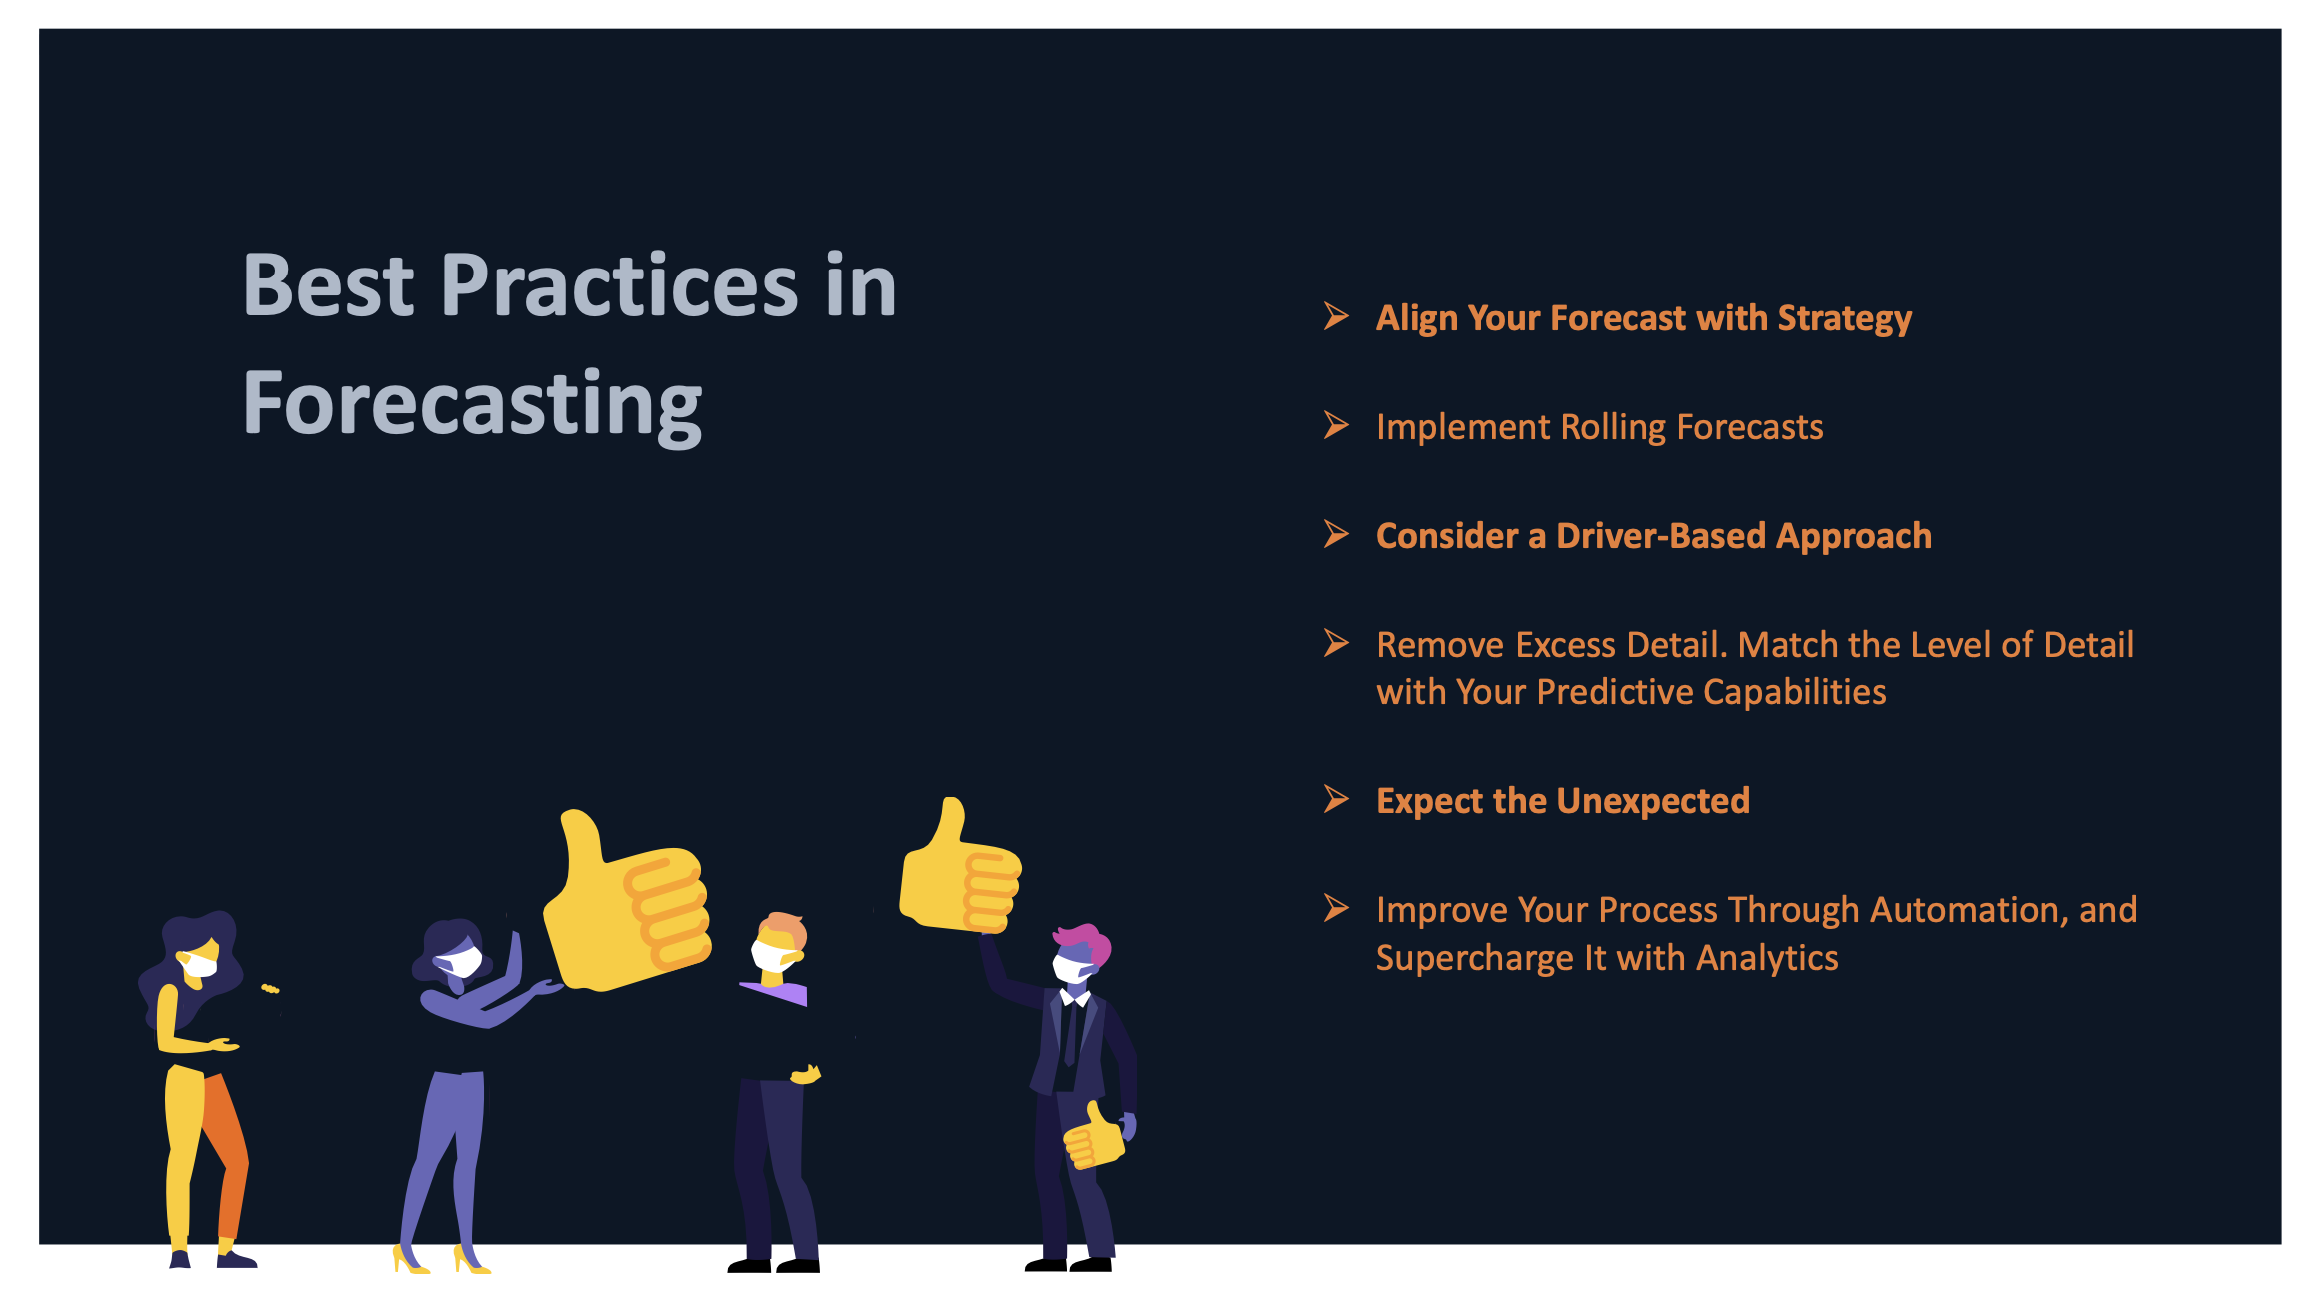 Best practices in forecasting